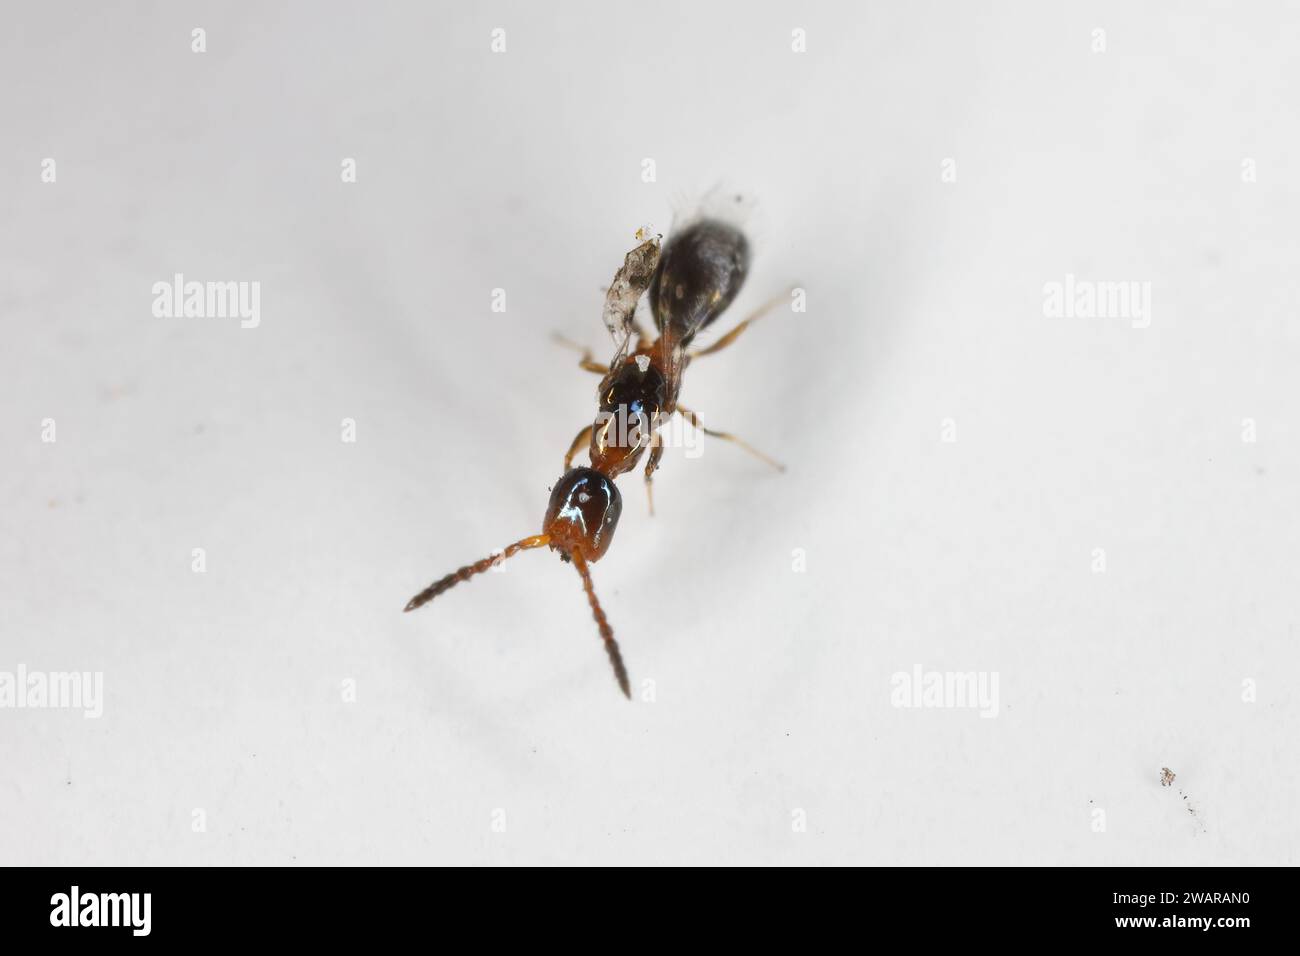 Parasitoid wasp from genus Laelius, Bethylidae family found in the seeds of a palm tree infested by the Palm seed borer (Coccotrypes dactyliperda). Stock Photo